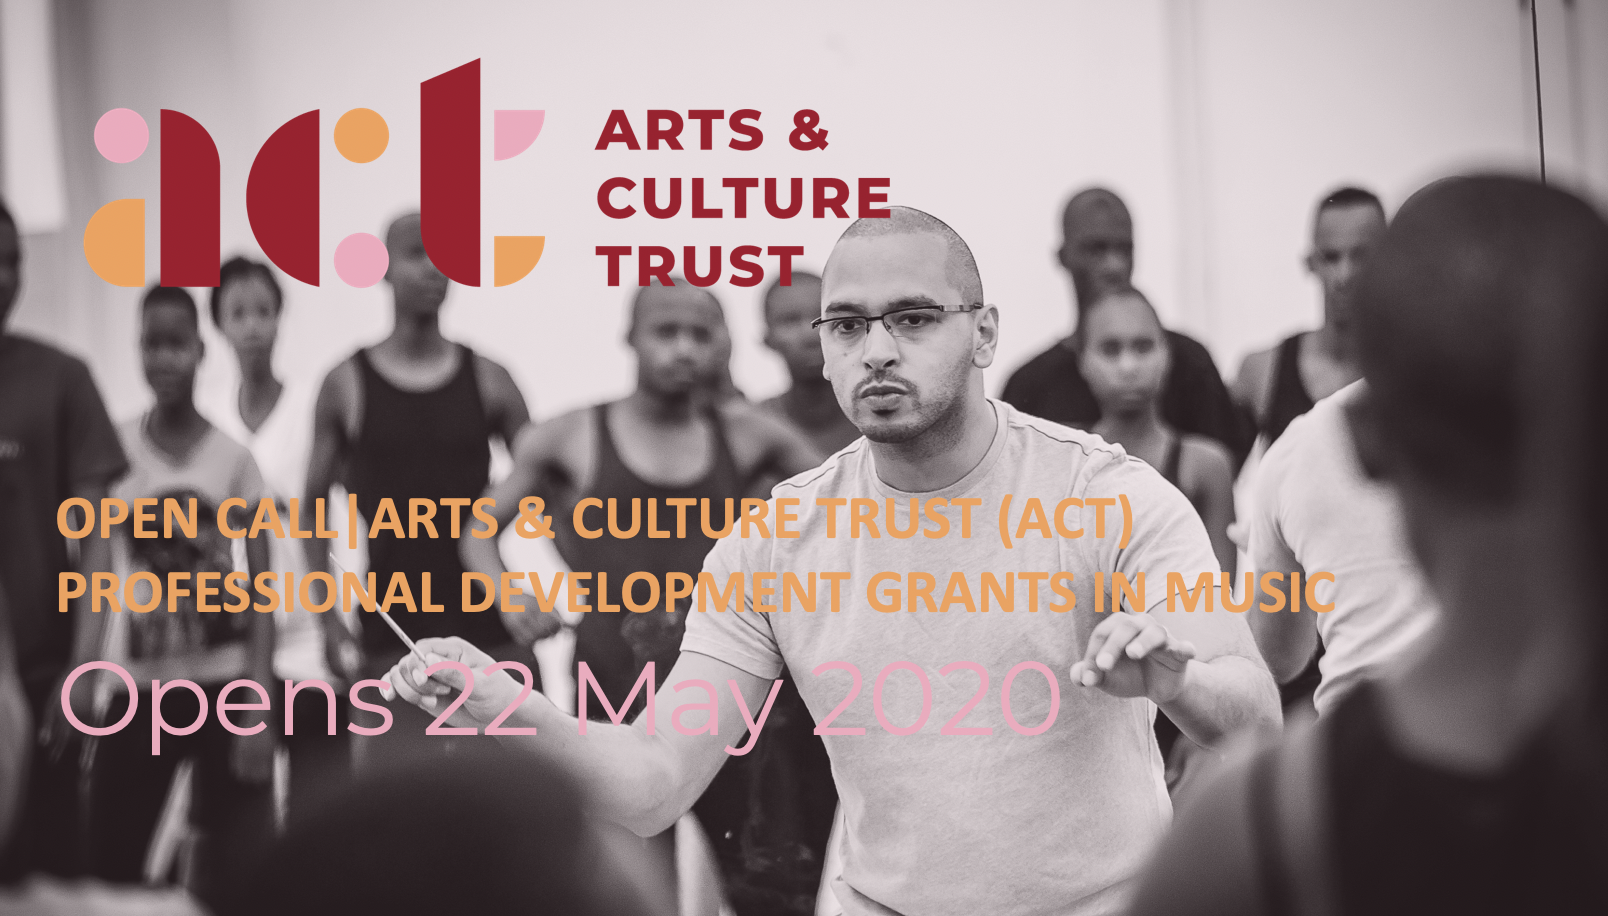 Arts & Culture Trust (ACT) Professional Development Grants in Music 2020 for South African artists